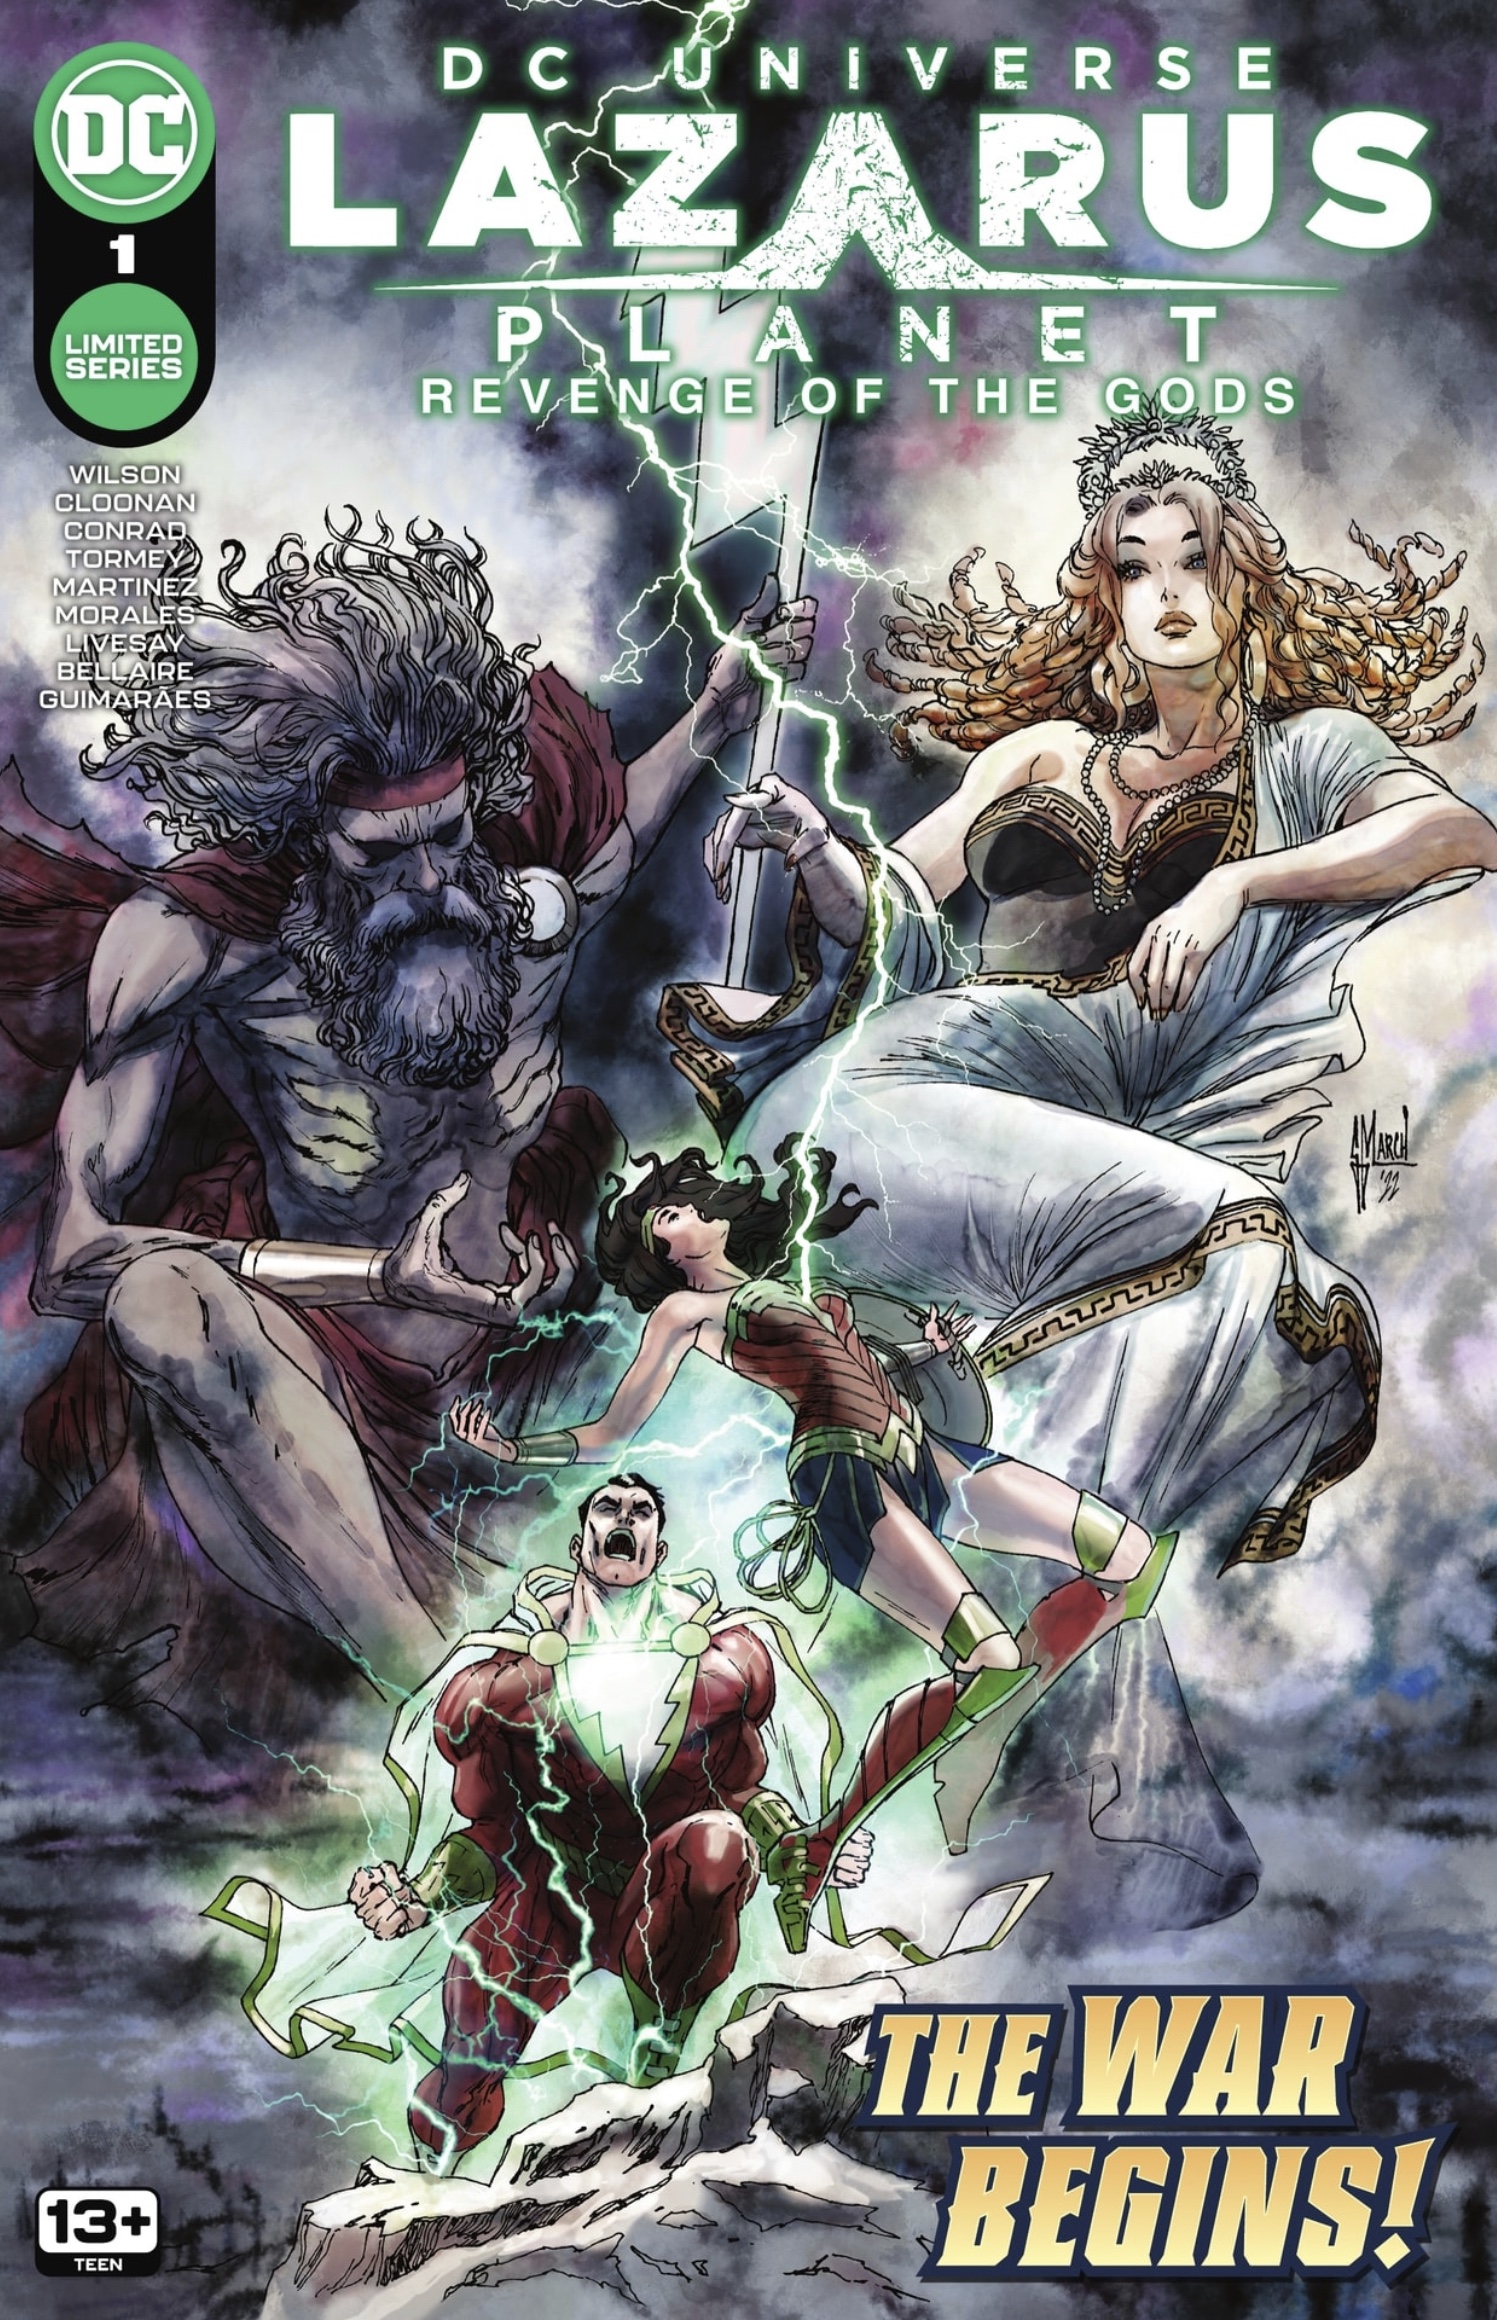 Lazarus Planet: Revenge of the Gods #1 review – Too Dangerous For